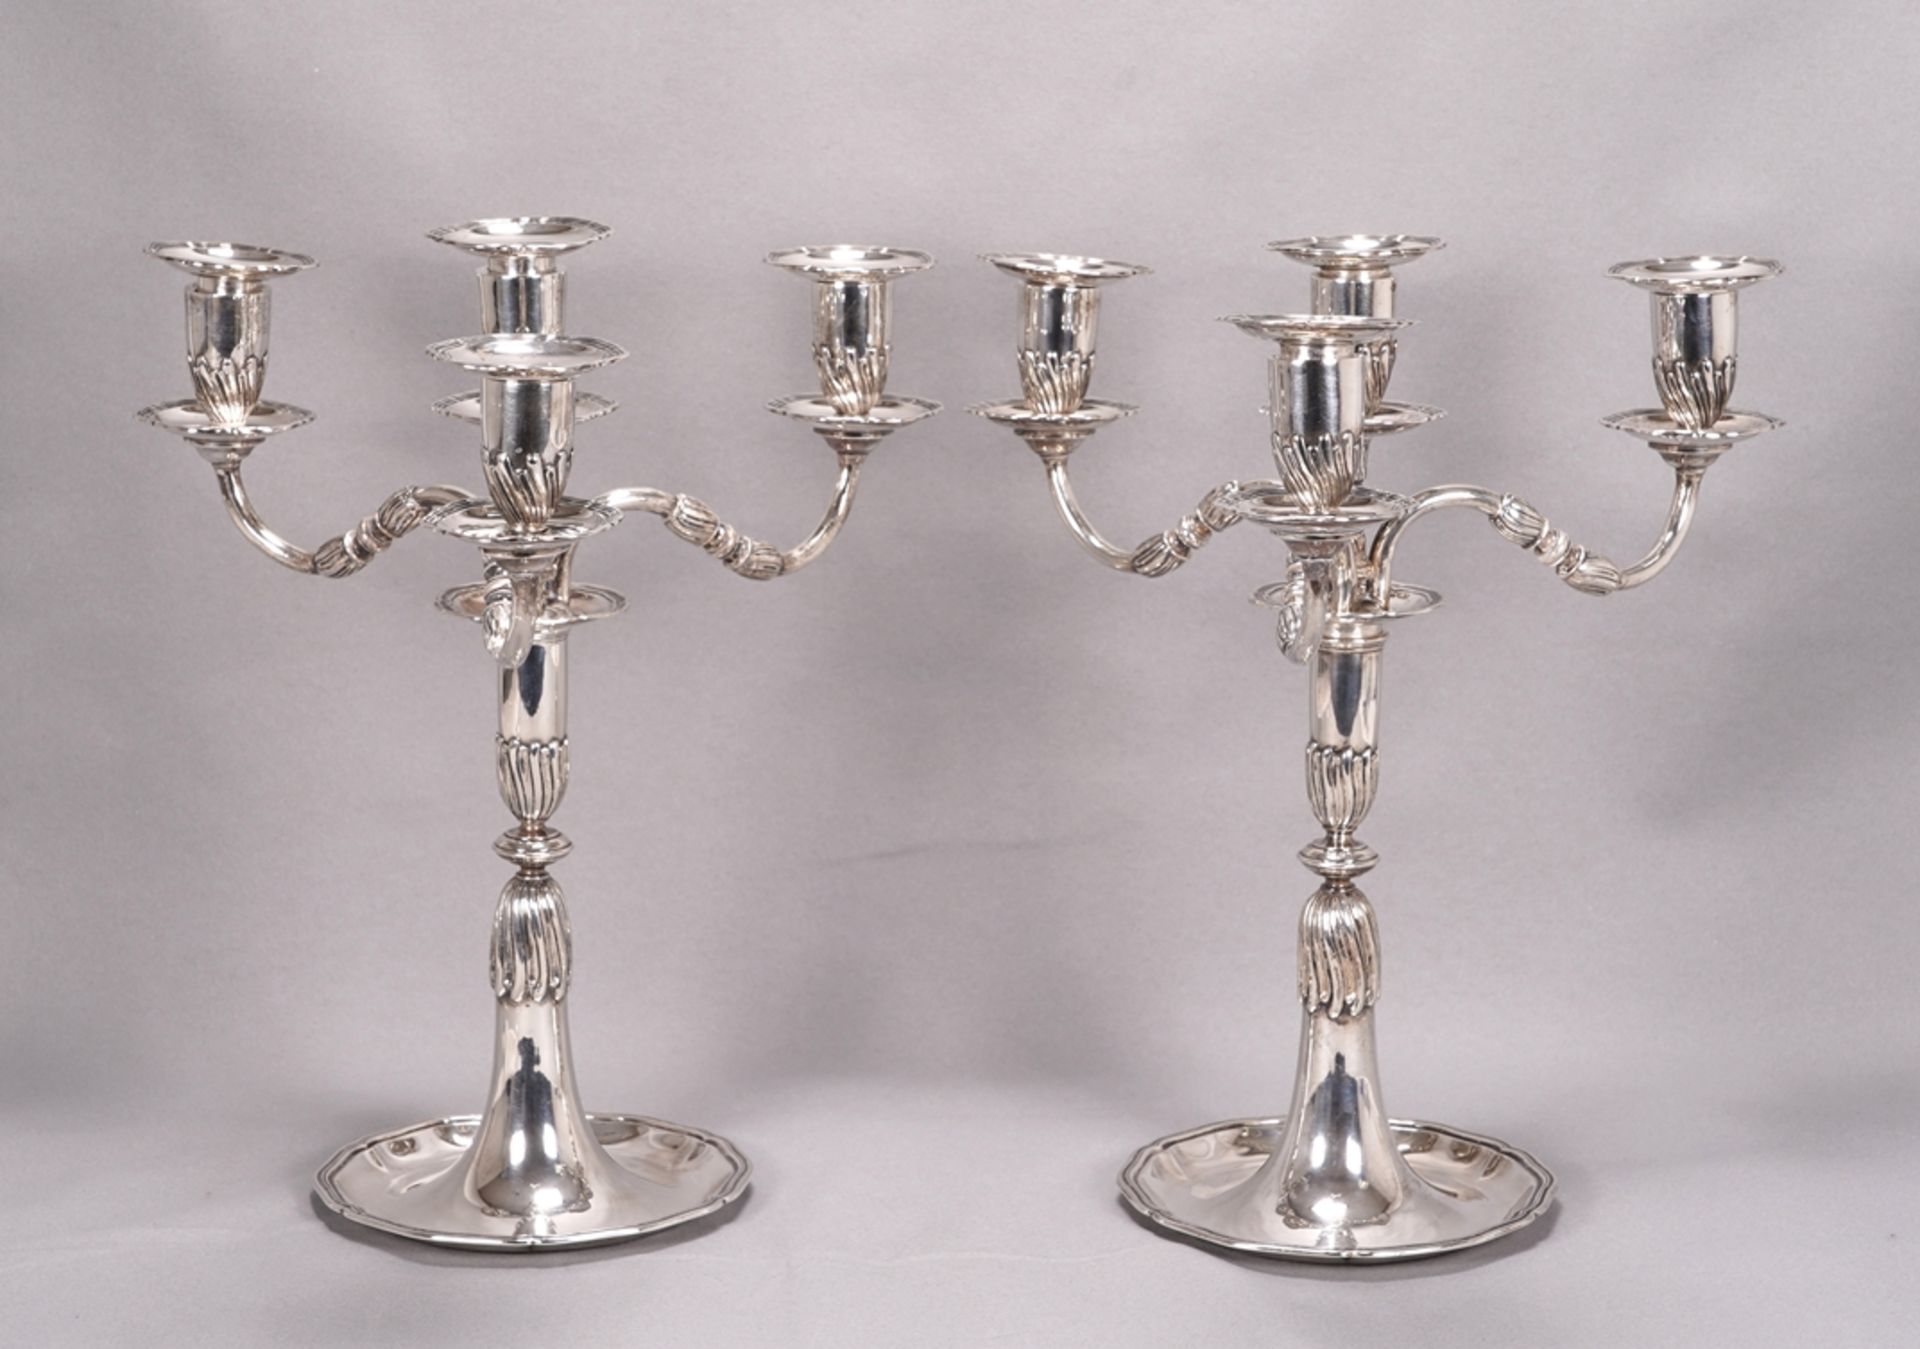 Pair of table candlesticks - Image 2 of 4